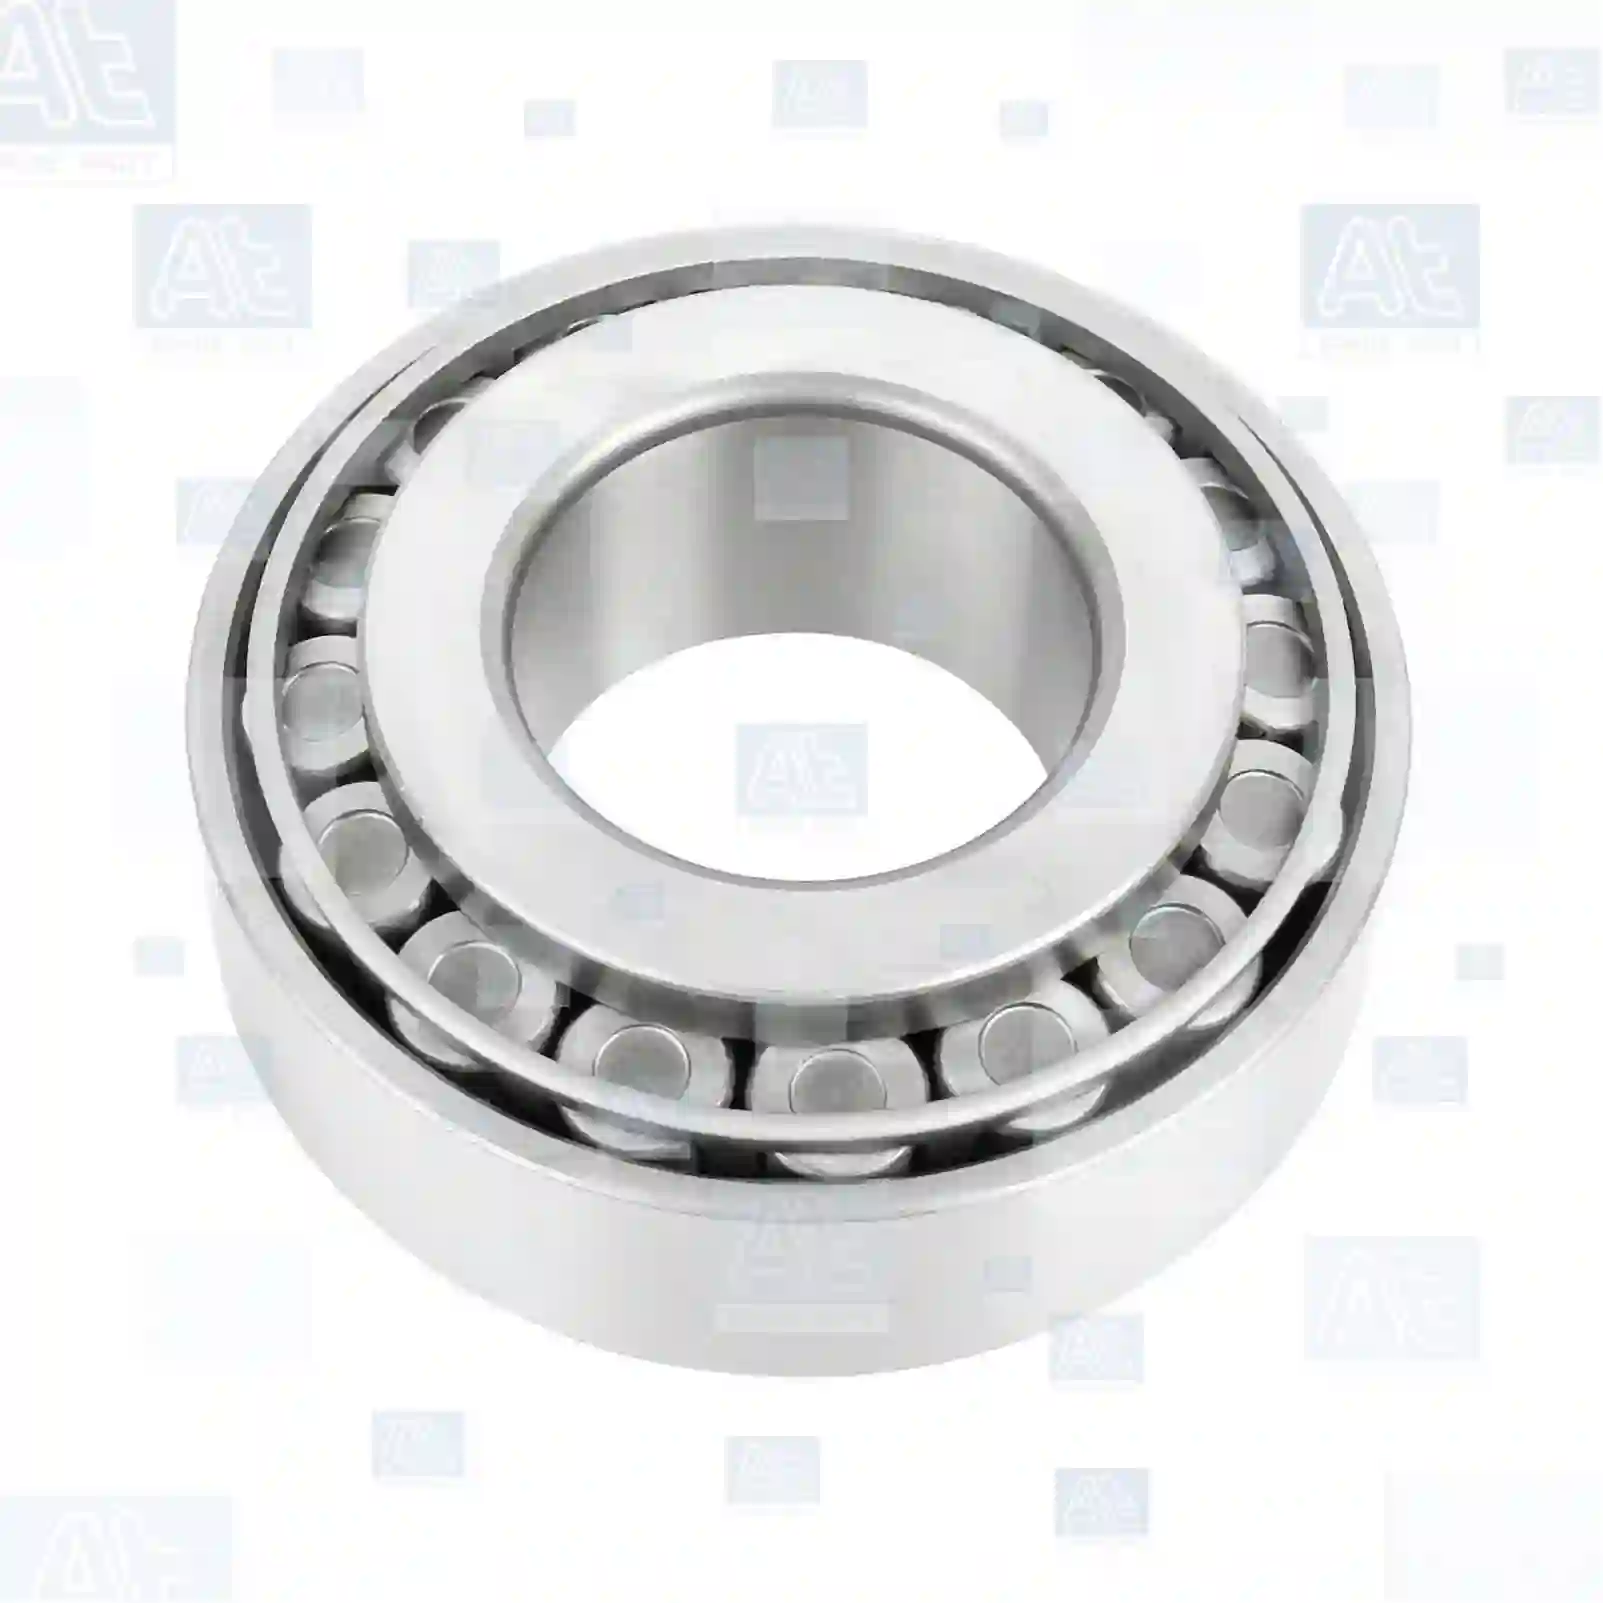 Tapered roller bearing, 77725192, 30030548, 0264067000, 0264102700, 640616, 26800640, 10500873, 710500873, 26800640, 06324990020, 06324990082, 06324990084, 06324990085, 06324990157, 81934200082, 81934200084, 87523401240, A0023432314, 0009817705, 0039811305, 0049819805, 0049819905, 0059810005, 0129813205, 0959532314, 4200003400, 2V5501319 ||  77725192 At Spare Part | Engine, Accelerator Pedal, Camshaft, Connecting Rod, Crankcase, Crankshaft, Cylinder Head, Engine Suspension Mountings, Exhaust Manifold, Exhaust Gas Recirculation, Filter Kits, Flywheel Housing, General Overhaul Kits, Engine, Intake Manifold, Oil Cleaner, Oil Cooler, Oil Filter, Oil Pump, Oil Sump, Piston & Liner, Sensor & Switch, Timing Case, Turbocharger, Cooling System, Belt Tensioner, Coolant Filter, Coolant Pipe, Corrosion Prevention Agent, Drive, Expansion Tank, Fan, Intercooler, Monitors & Gauges, Radiator, Thermostat, V-Belt / Timing belt, Water Pump, Fuel System, Electronical Injector Unit, Feed Pump, Fuel Filter, cpl., Fuel Gauge Sender,  Fuel Line, Fuel Pump, Fuel Tank, Injection Line Kit, Injection Pump, Exhaust System, Clutch & Pedal, Gearbox, Propeller Shaft, Axles, Brake System, Hubs & Wheels, Suspension, Leaf Spring, Universal Parts / Accessories, Steering, Electrical System, Cabin Tapered roller bearing, 77725192, 30030548, 0264067000, 0264102700, 640616, 26800640, 10500873, 710500873, 26800640, 06324990020, 06324990082, 06324990084, 06324990085, 06324990157, 81934200082, 81934200084, 87523401240, A0023432314, 0009817705, 0039811305, 0049819805, 0049819905, 0059810005, 0129813205, 0959532314, 4200003400, 2V5501319 ||  77725192 At Spare Part | Engine, Accelerator Pedal, Camshaft, Connecting Rod, Crankcase, Crankshaft, Cylinder Head, Engine Suspension Mountings, Exhaust Manifold, Exhaust Gas Recirculation, Filter Kits, Flywheel Housing, General Overhaul Kits, Engine, Intake Manifold, Oil Cleaner, Oil Cooler, Oil Filter, Oil Pump, Oil Sump, Piston & Liner, Sensor & Switch, Timing Case, Turbocharger, Cooling System, Belt Tensioner, Coolant Filter, Coolant Pipe, Corrosion Prevention Agent, Drive, Expansion Tank, Fan, Intercooler, Monitors & Gauges, Radiator, Thermostat, V-Belt / Timing belt, Water Pump, Fuel System, Electronical Injector Unit, Feed Pump, Fuel Filter, cpl., Fuel Gauge Sender,  Fuel Line, Fuel Pump, Fuel Tank, Injection Line Kit, Injection Pump, Exhaust System, Clutch & Pedal, Gearbox, Propeller Shaft, Axles, Brake System, Hubs & Wheels, Suspension, Leaf Spring, Universal Parts / Accessories, Steering, Electrical System, Cabin